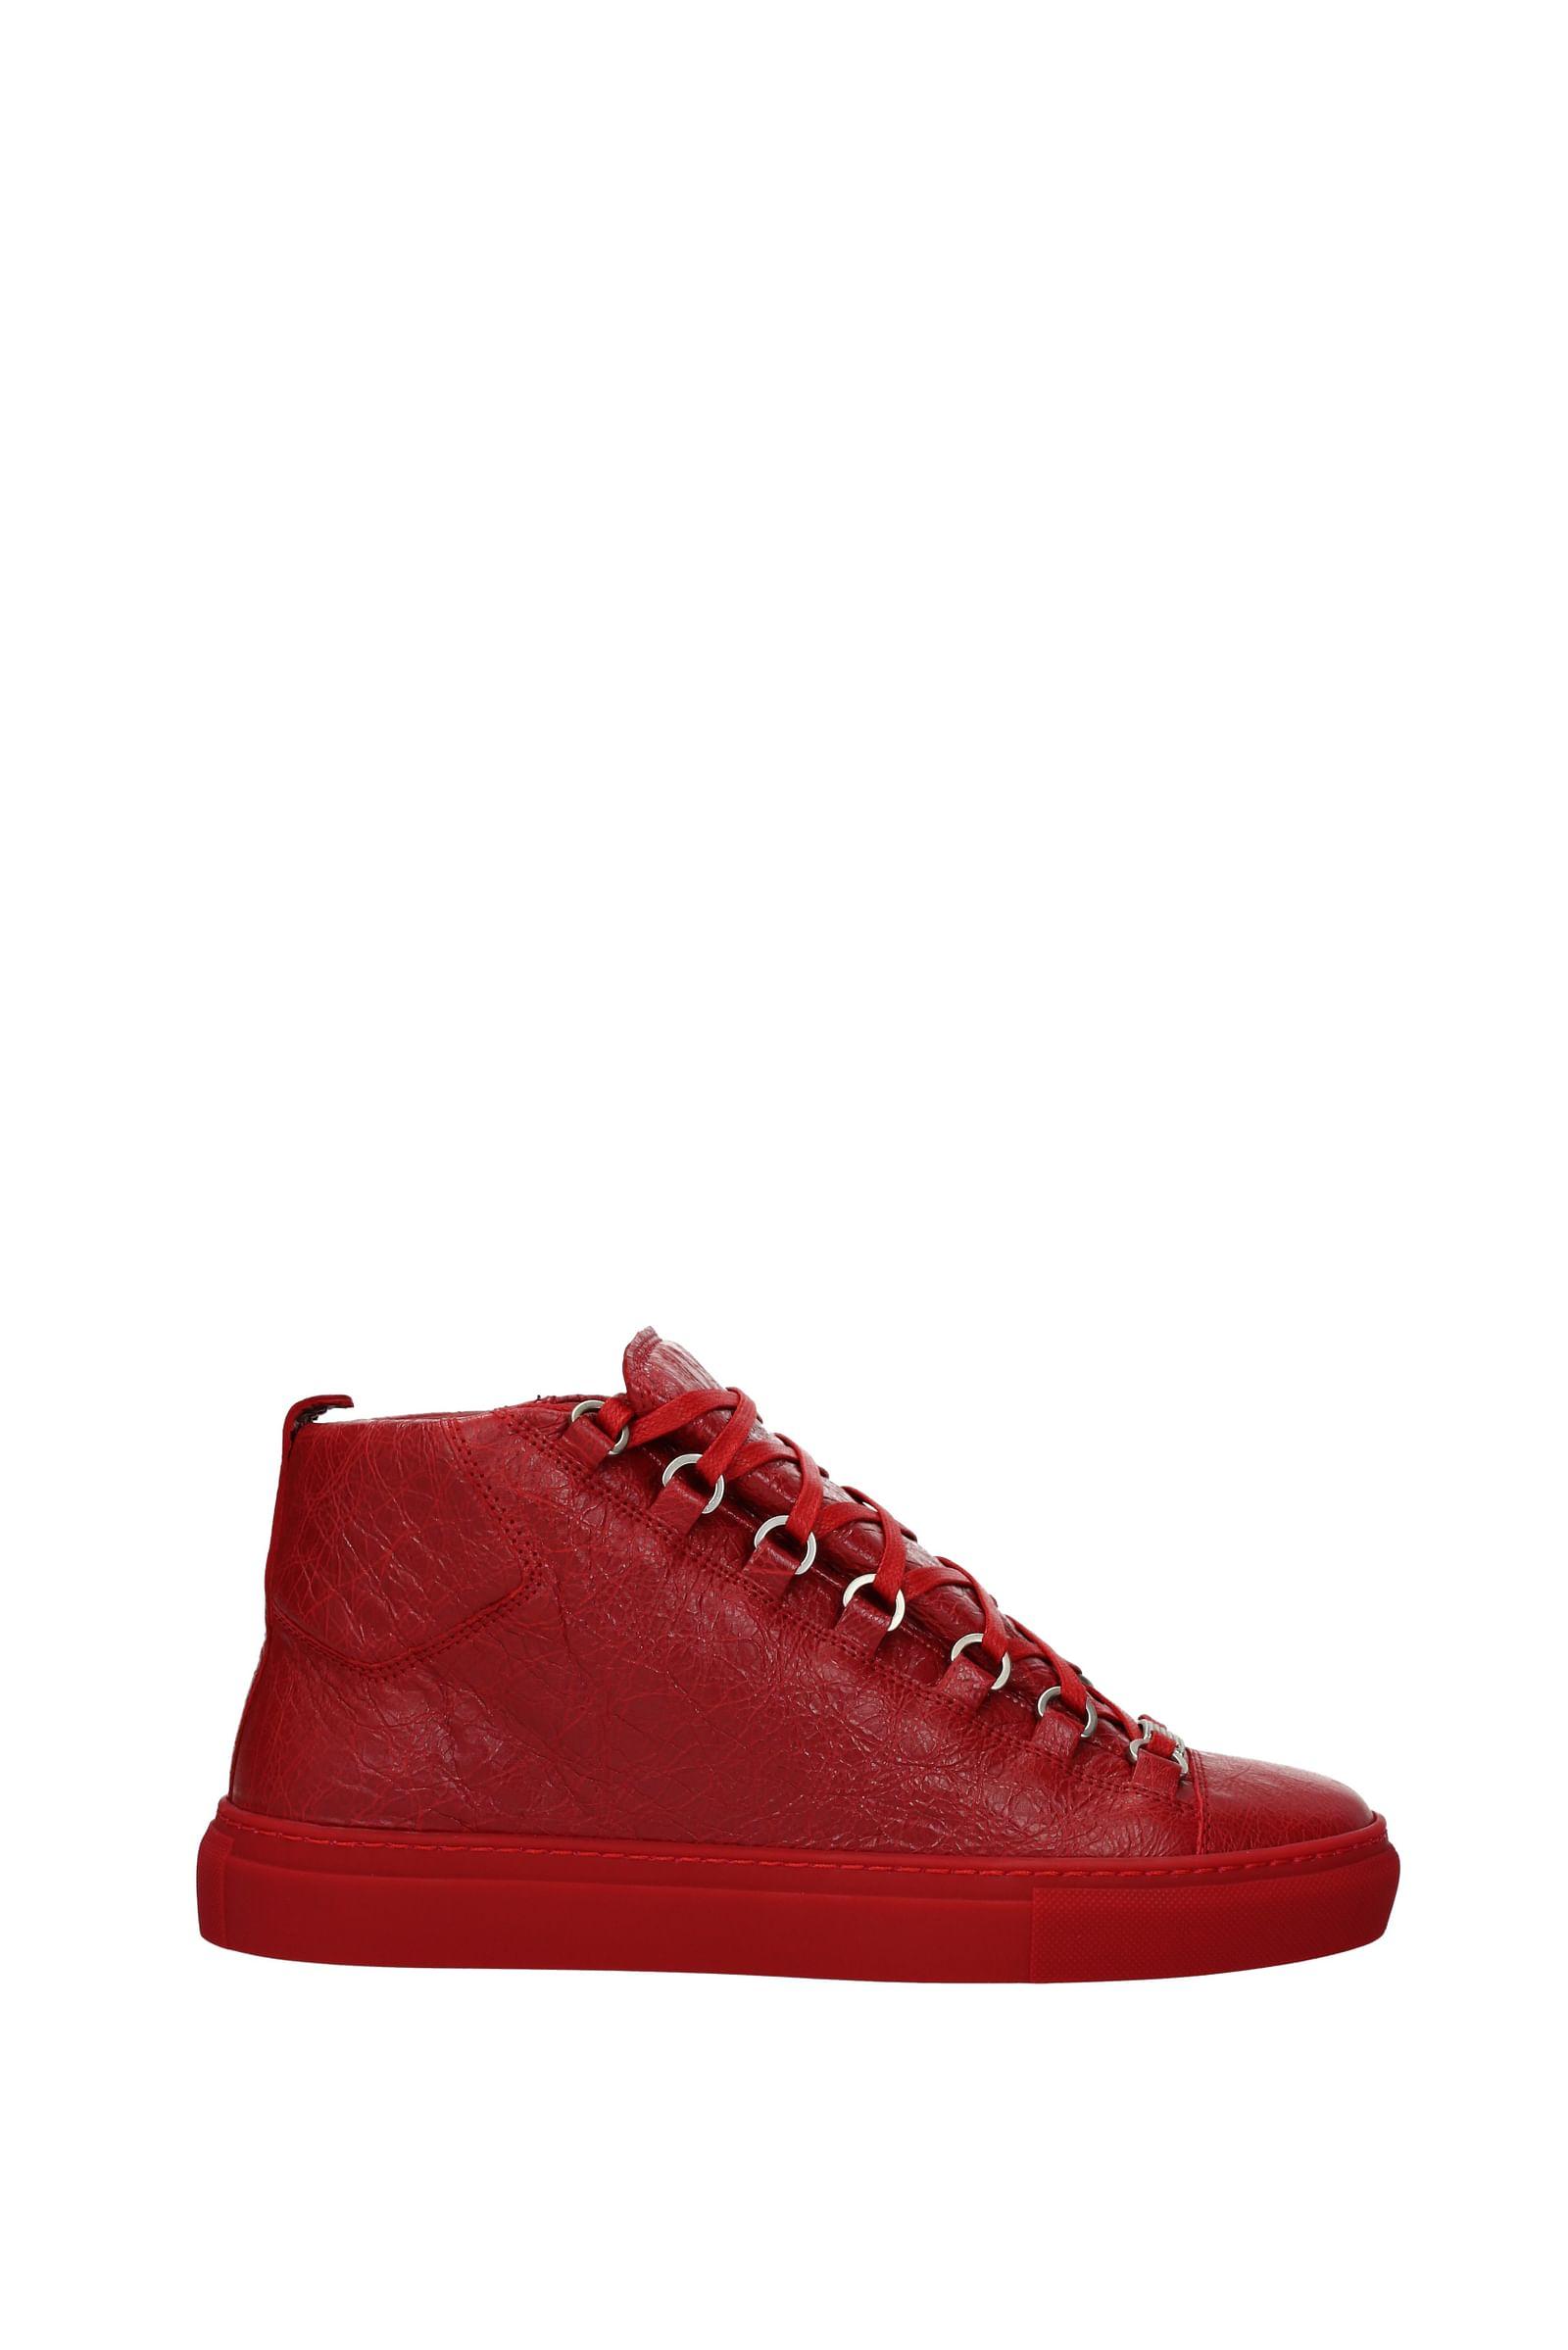 Mens Red Balenciaga Shoes  Sneakers  Editorialist